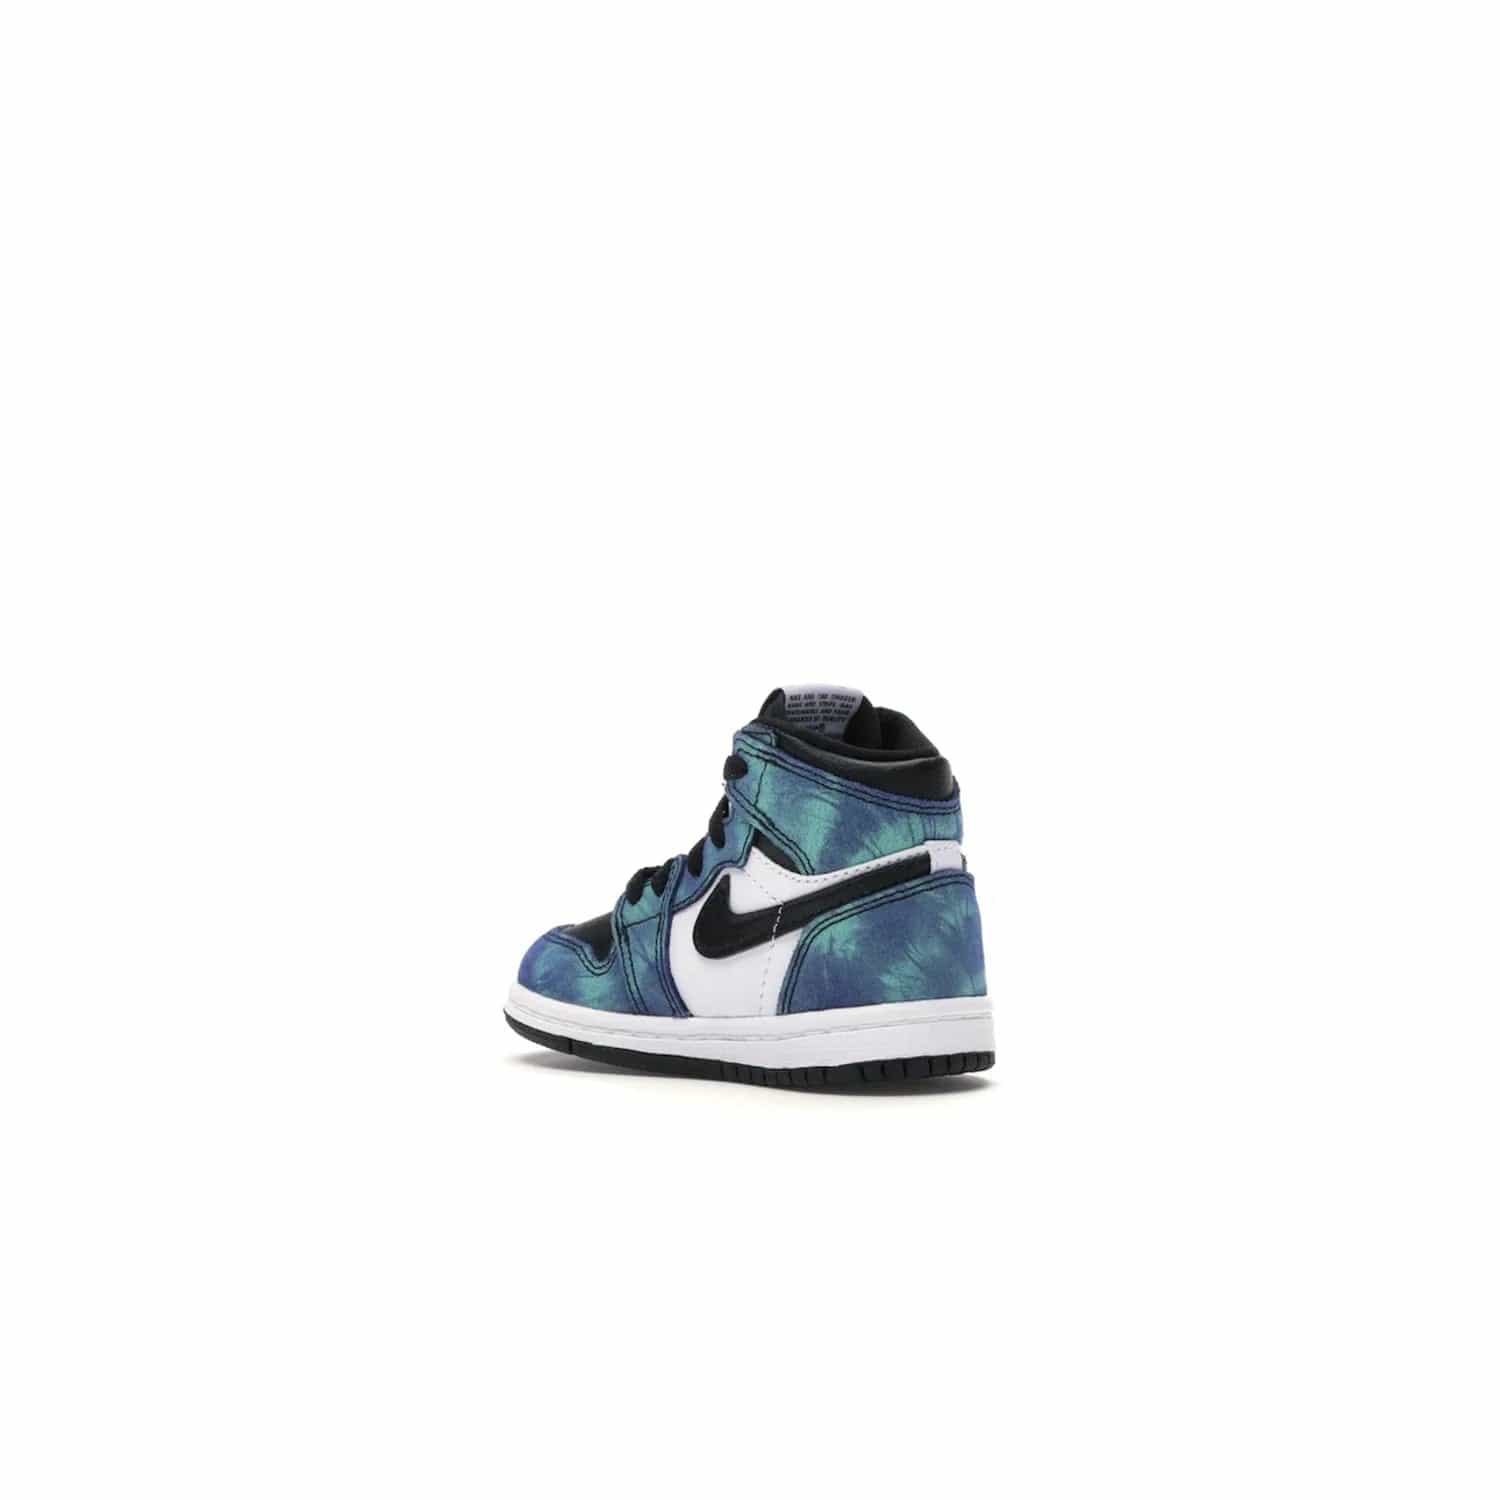 Jordan 1 Retro High Tie Dye (TD) - Image 23 - Only at www.BallersClubKickz.com - Add a unique twist to your sneaker collection with the Jordan 1 Retro High Tie Dye (TD). Classic Air Jordan 1 details like toe box perforations and the signature Swoosh logo on the sidewall are topped with an eye-catching tie dye design that’s perfect for styling all year round.